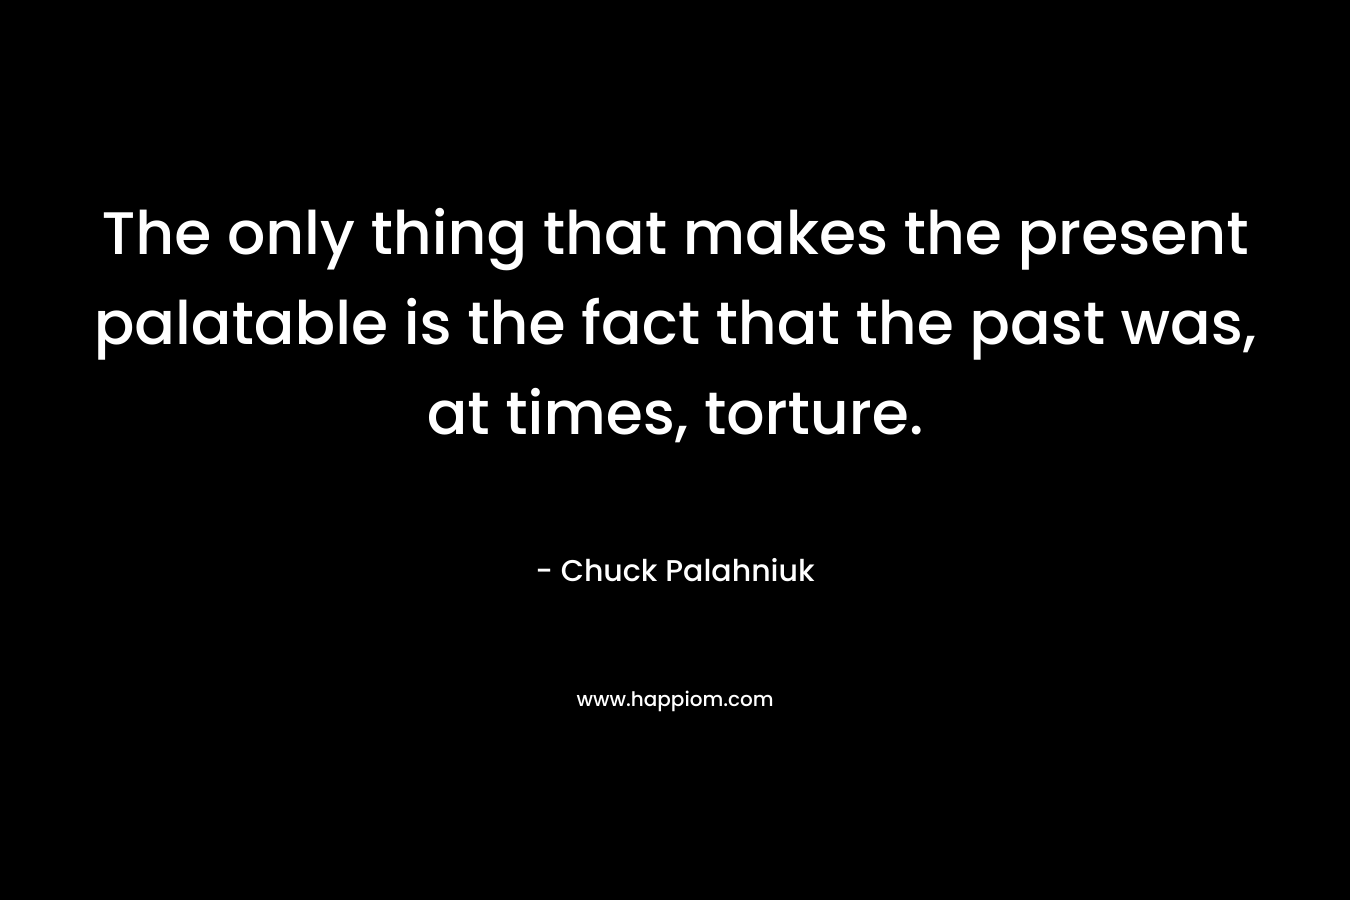 The only thing that makes the present palatable is the fact that the past was, at times, torture. – Chuck Palahniuk